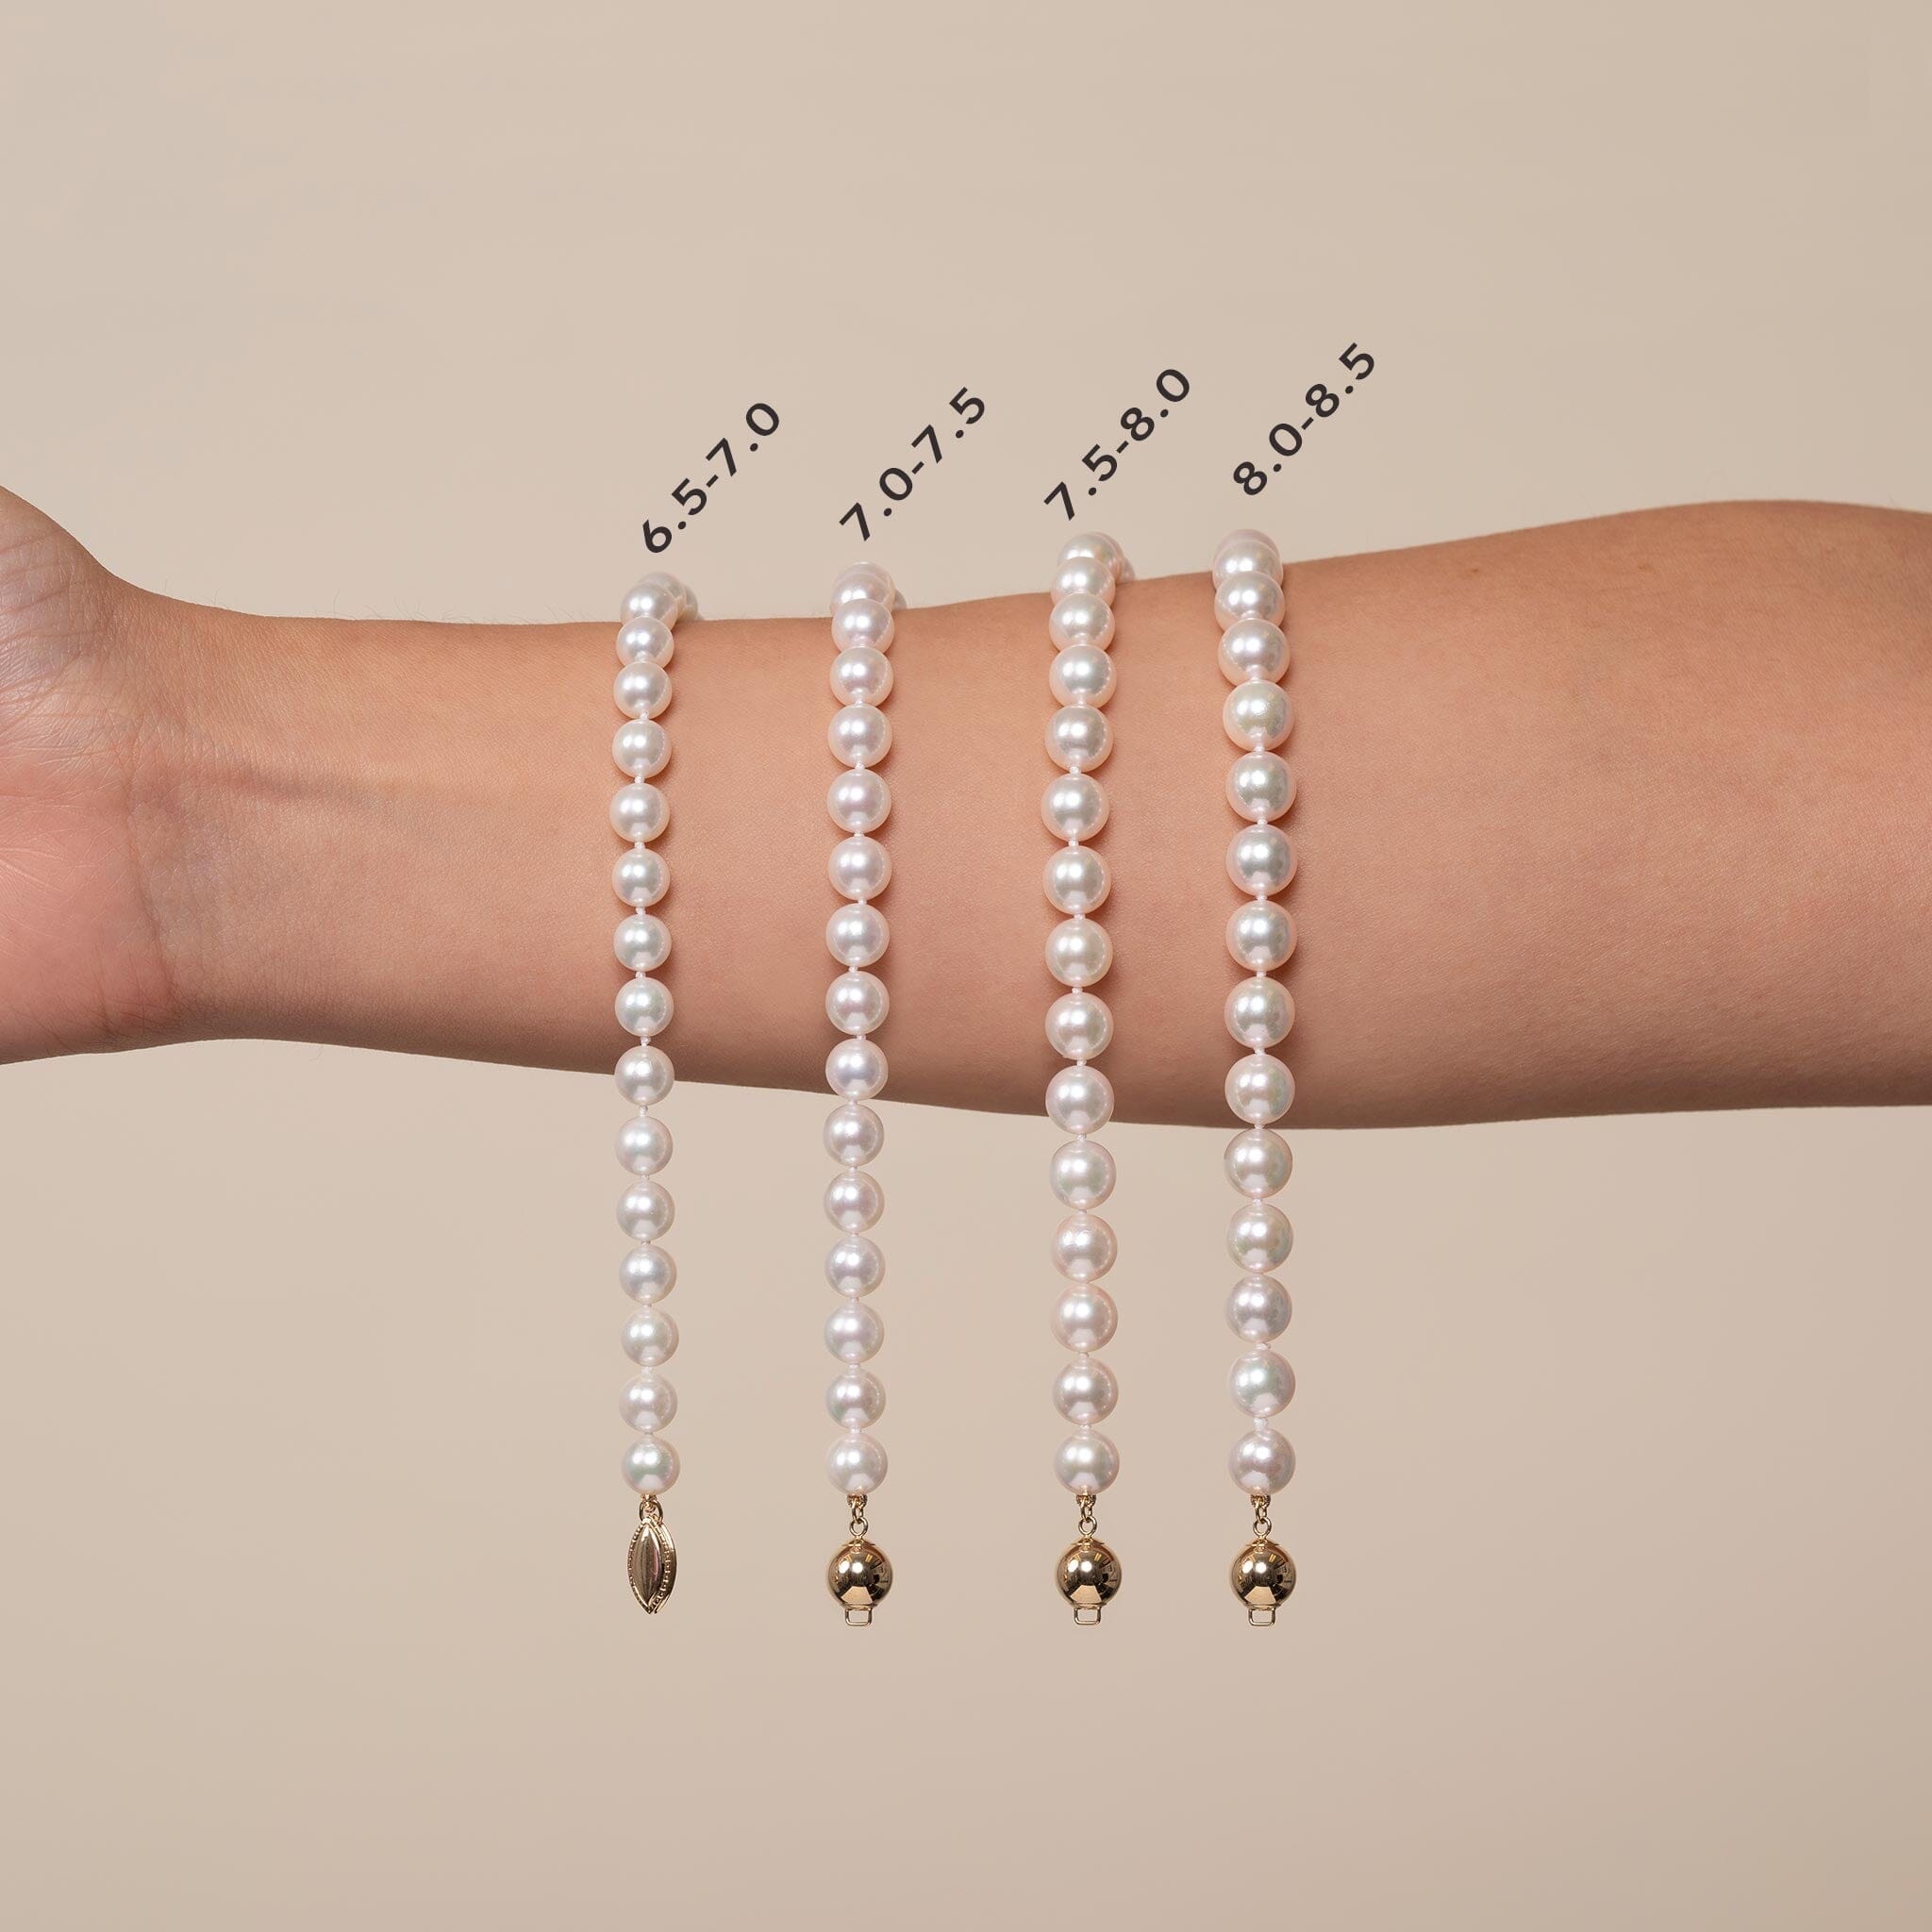 18 Inch 3 Piece Set of 7.0-7.5 mm AA+ White Akoya Pearls